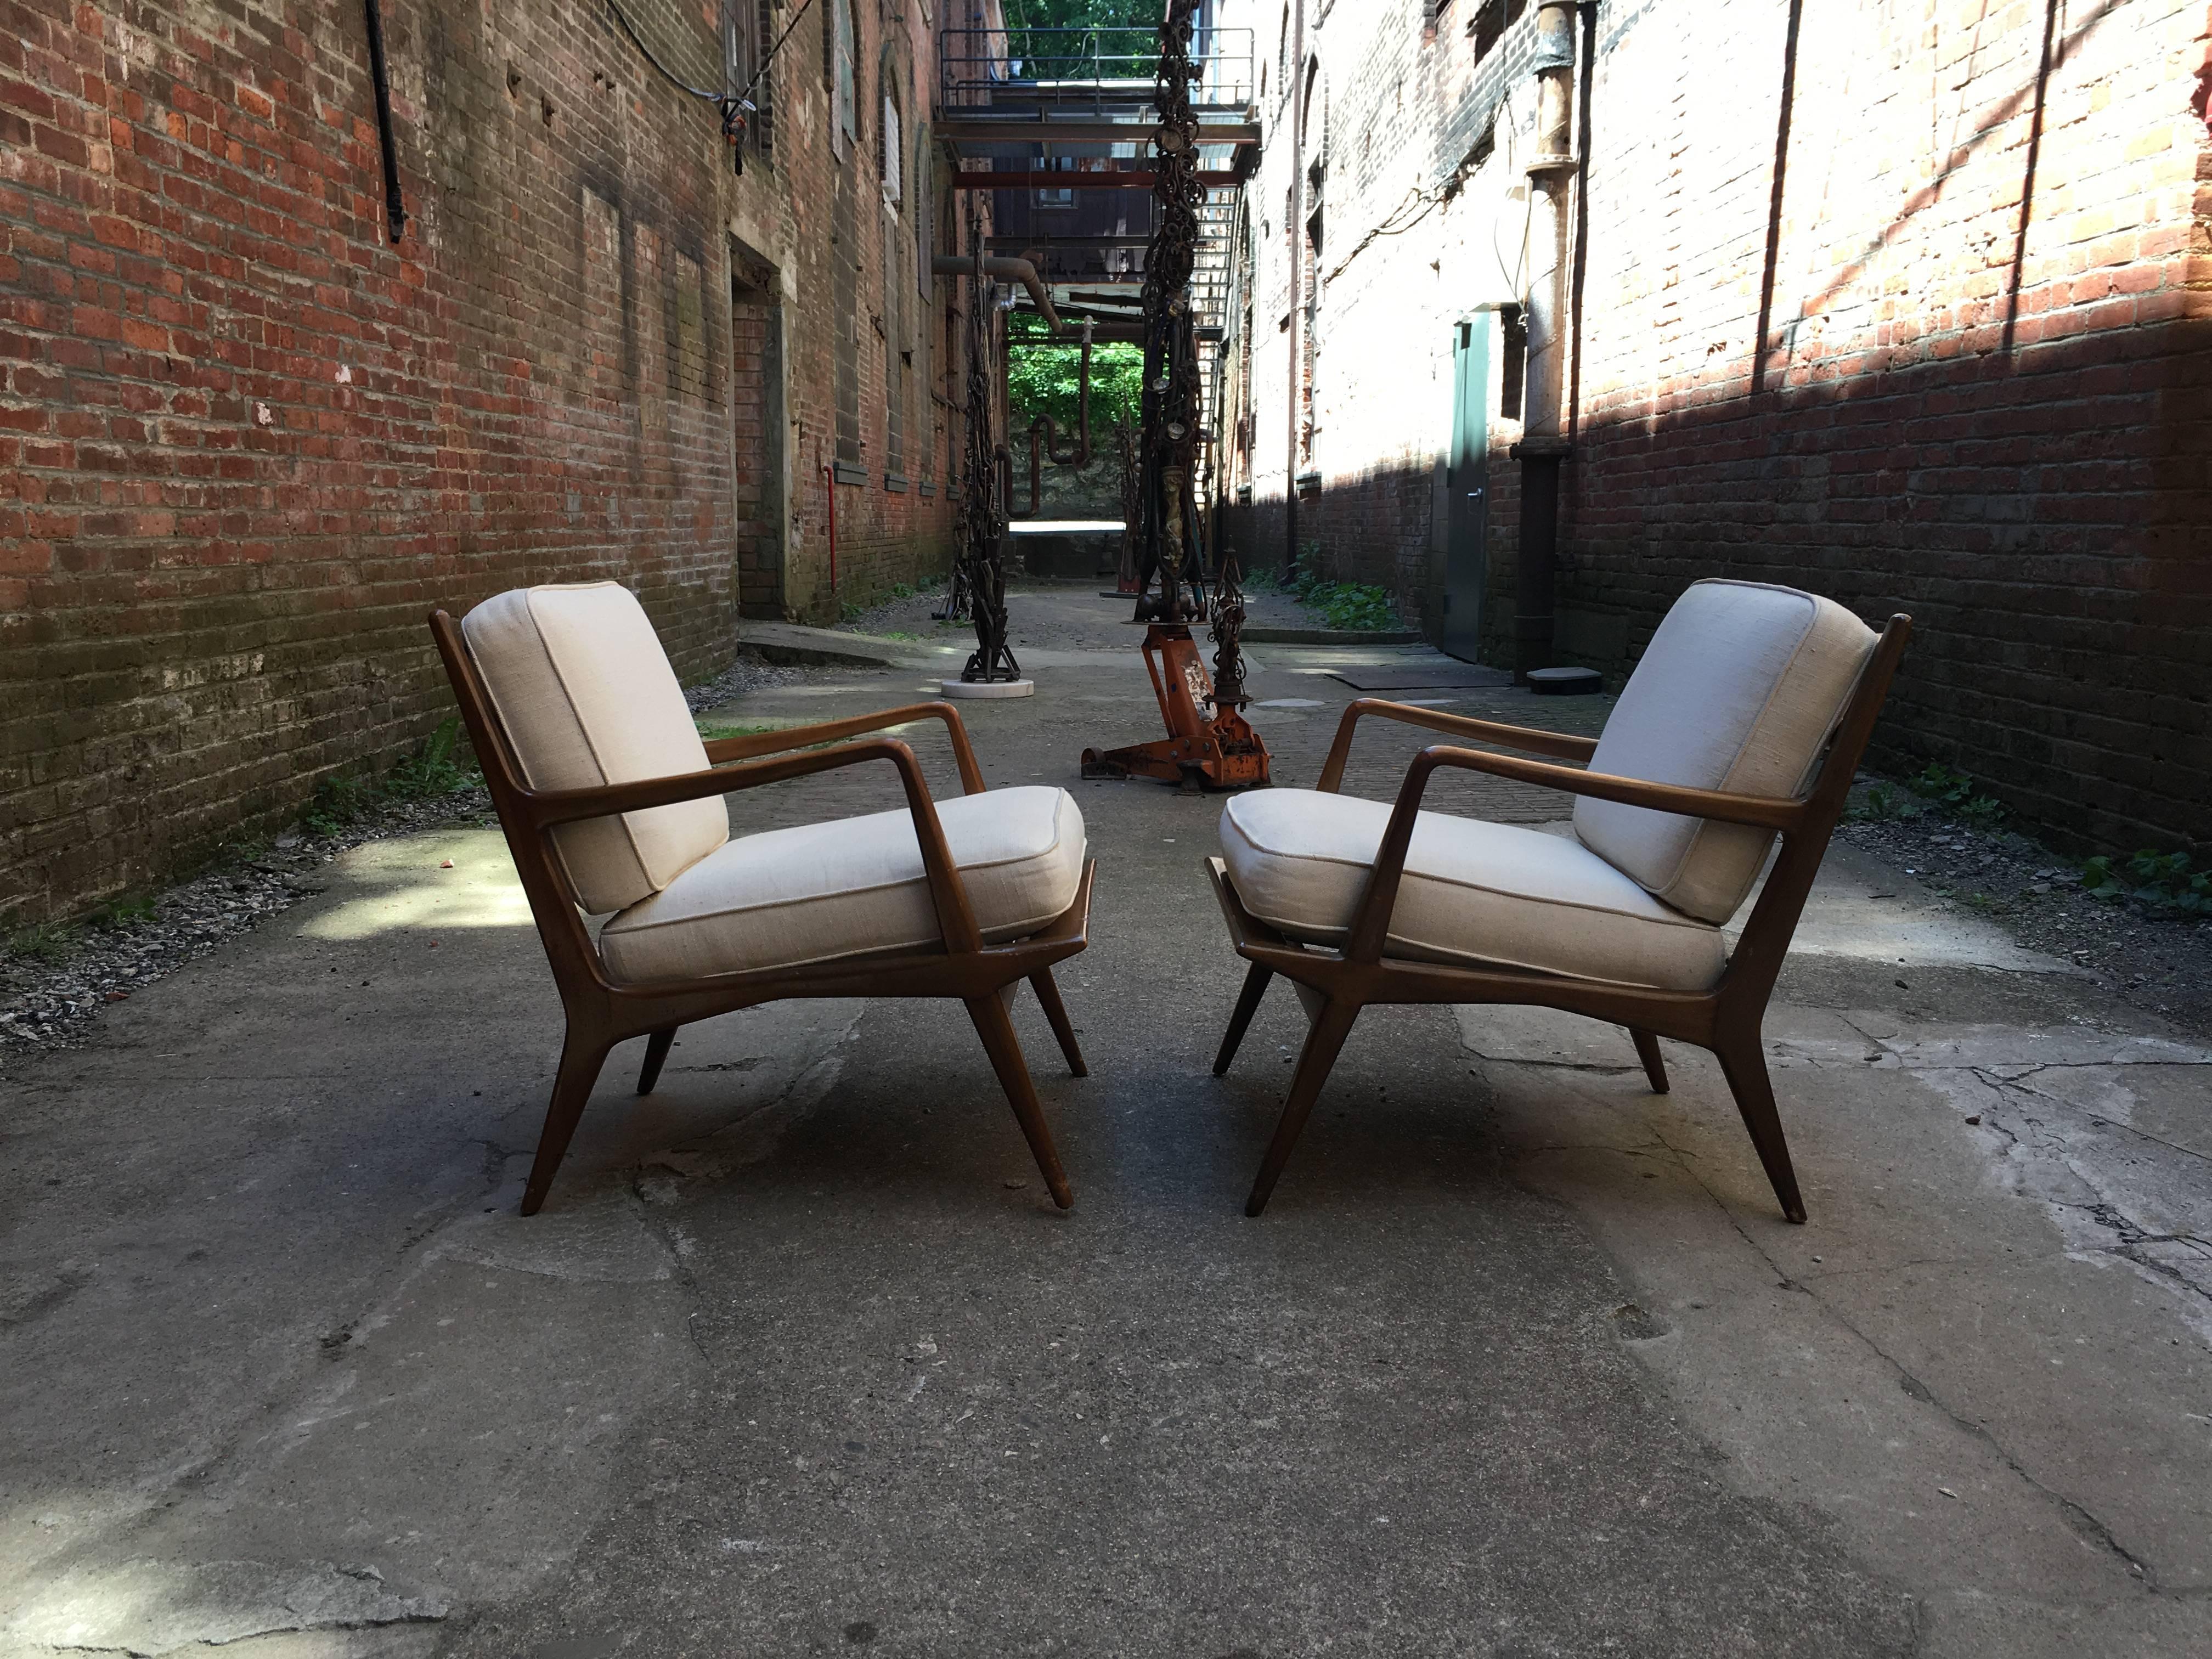 Beautiful walnut ladder back armchairs designed by Carlo di Carli for M. Singer & Sons. Elegant and sculptural pair of chairs retaining their original metal seat straps and splined rear leg detail. Upholstered white back and seat cushions. Original